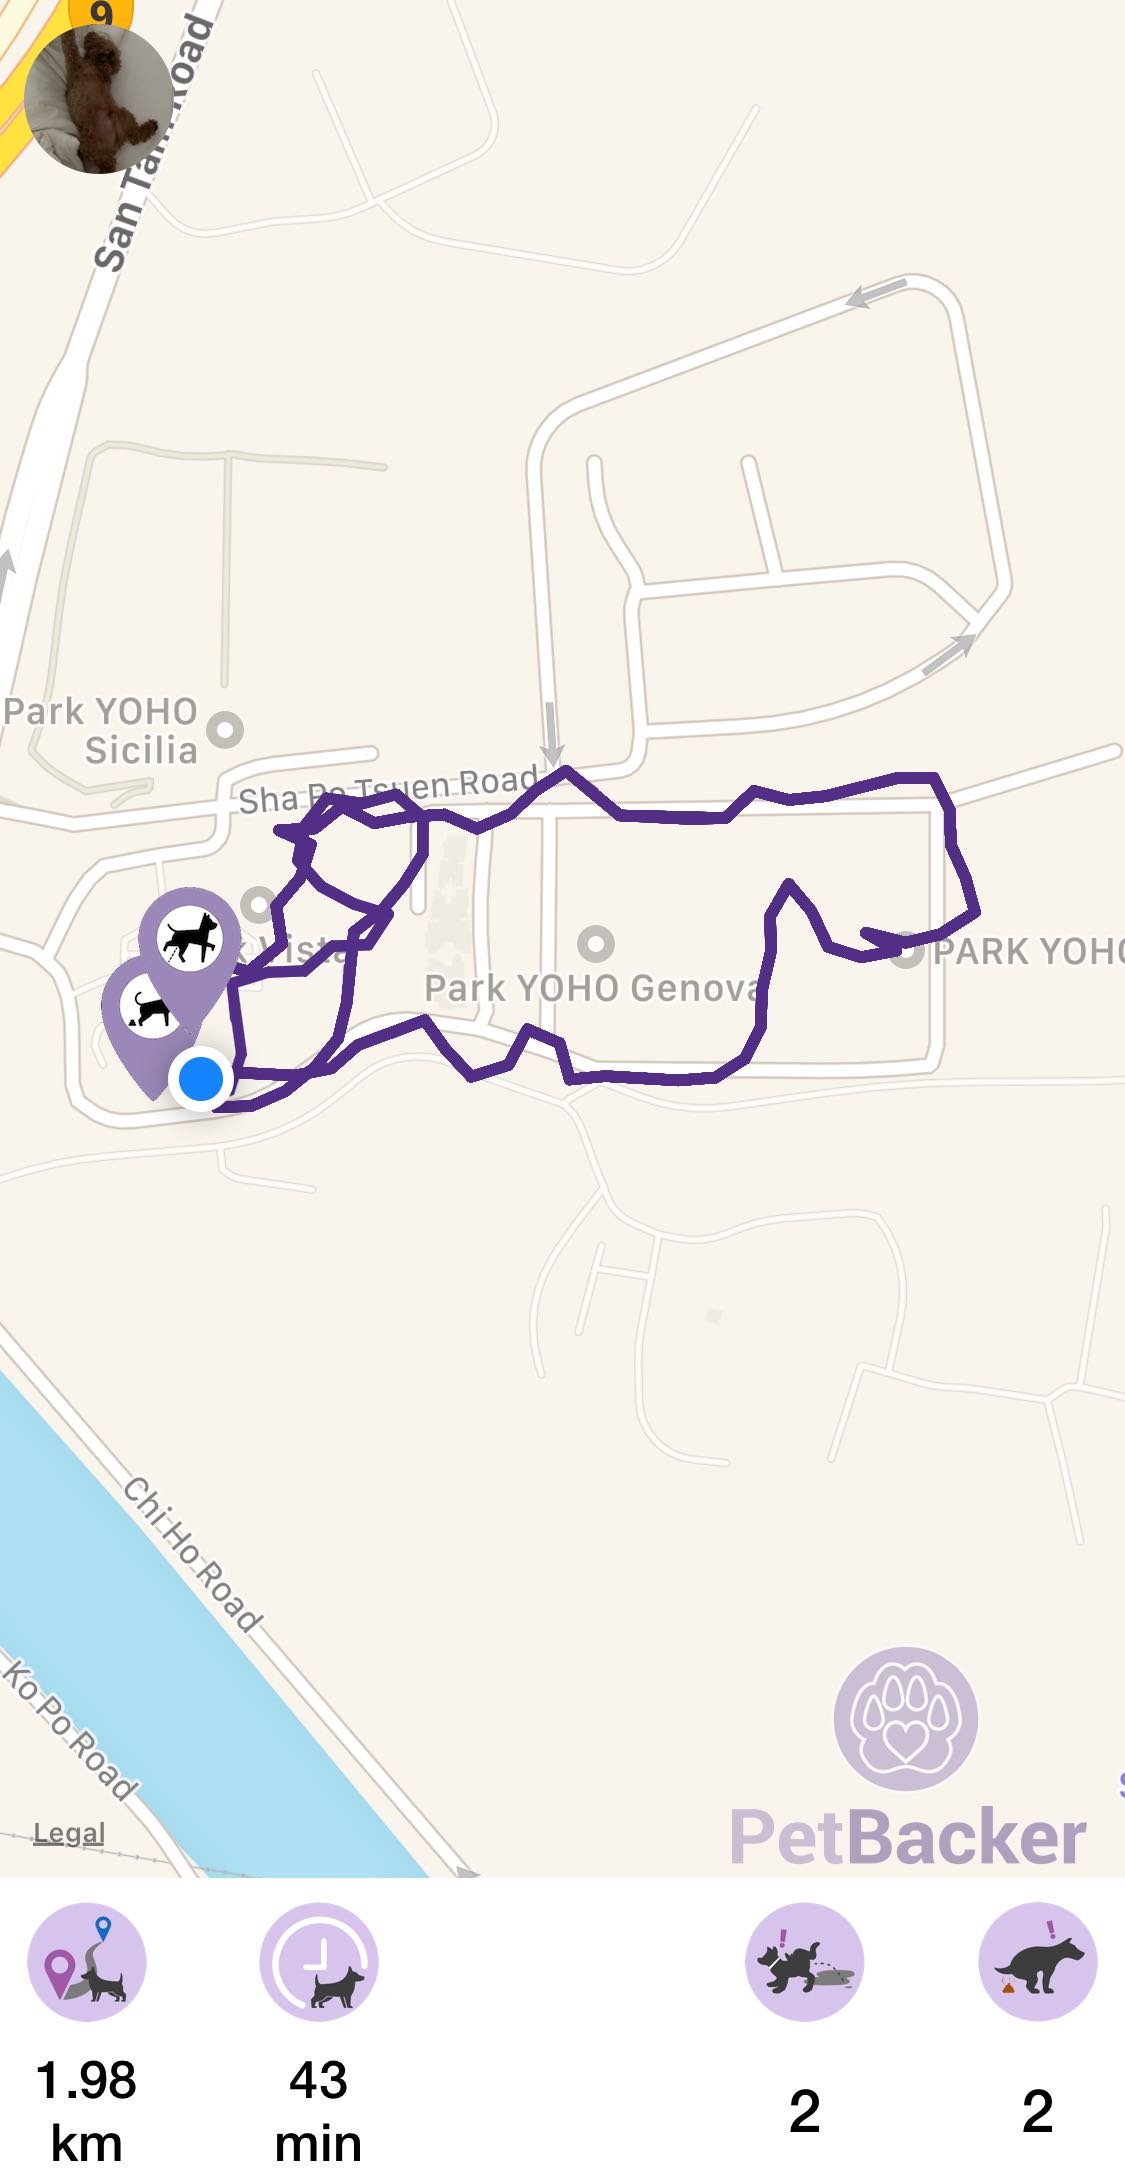 Just completed pet walking of 1.98 km